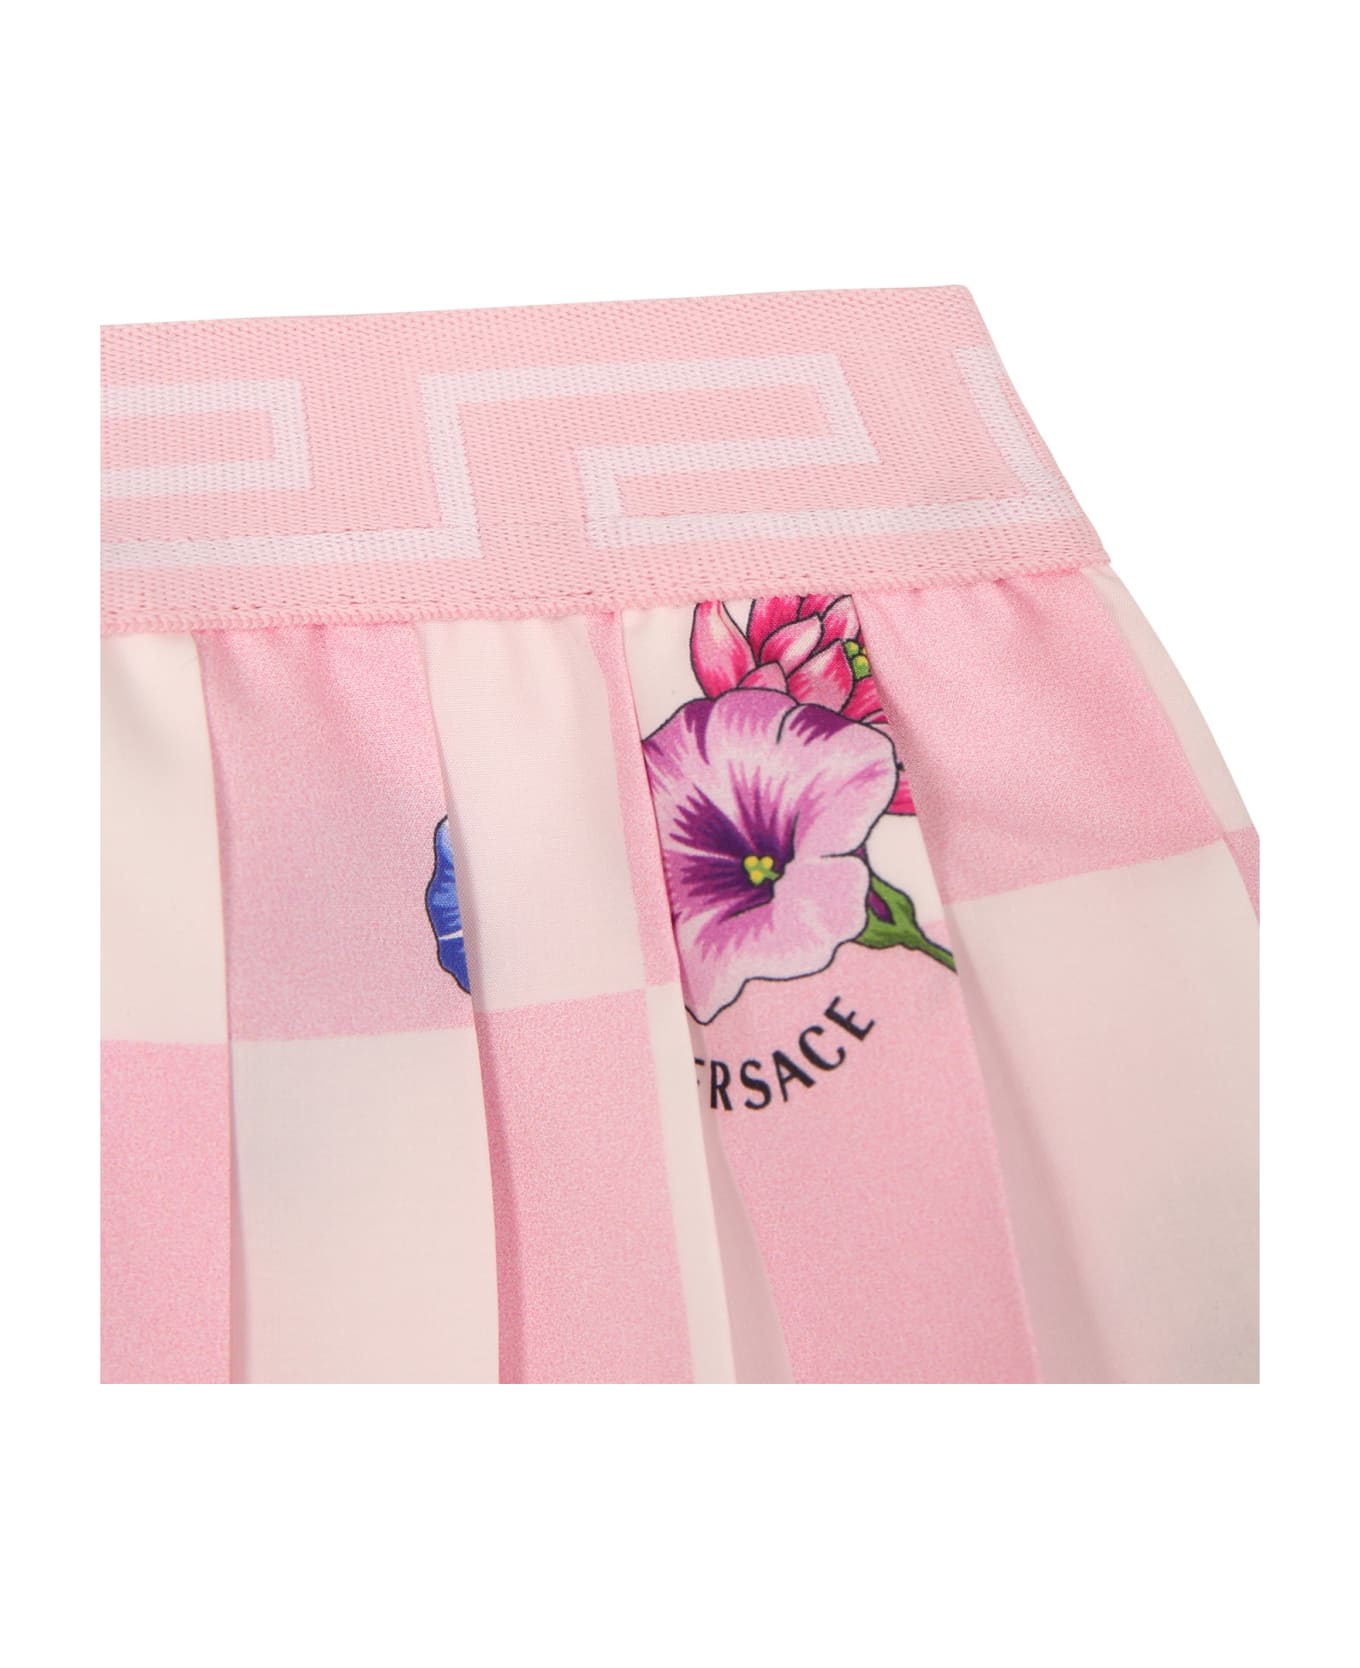 Versace Pink Skirt For Baby Girl With Flower Print - Pink